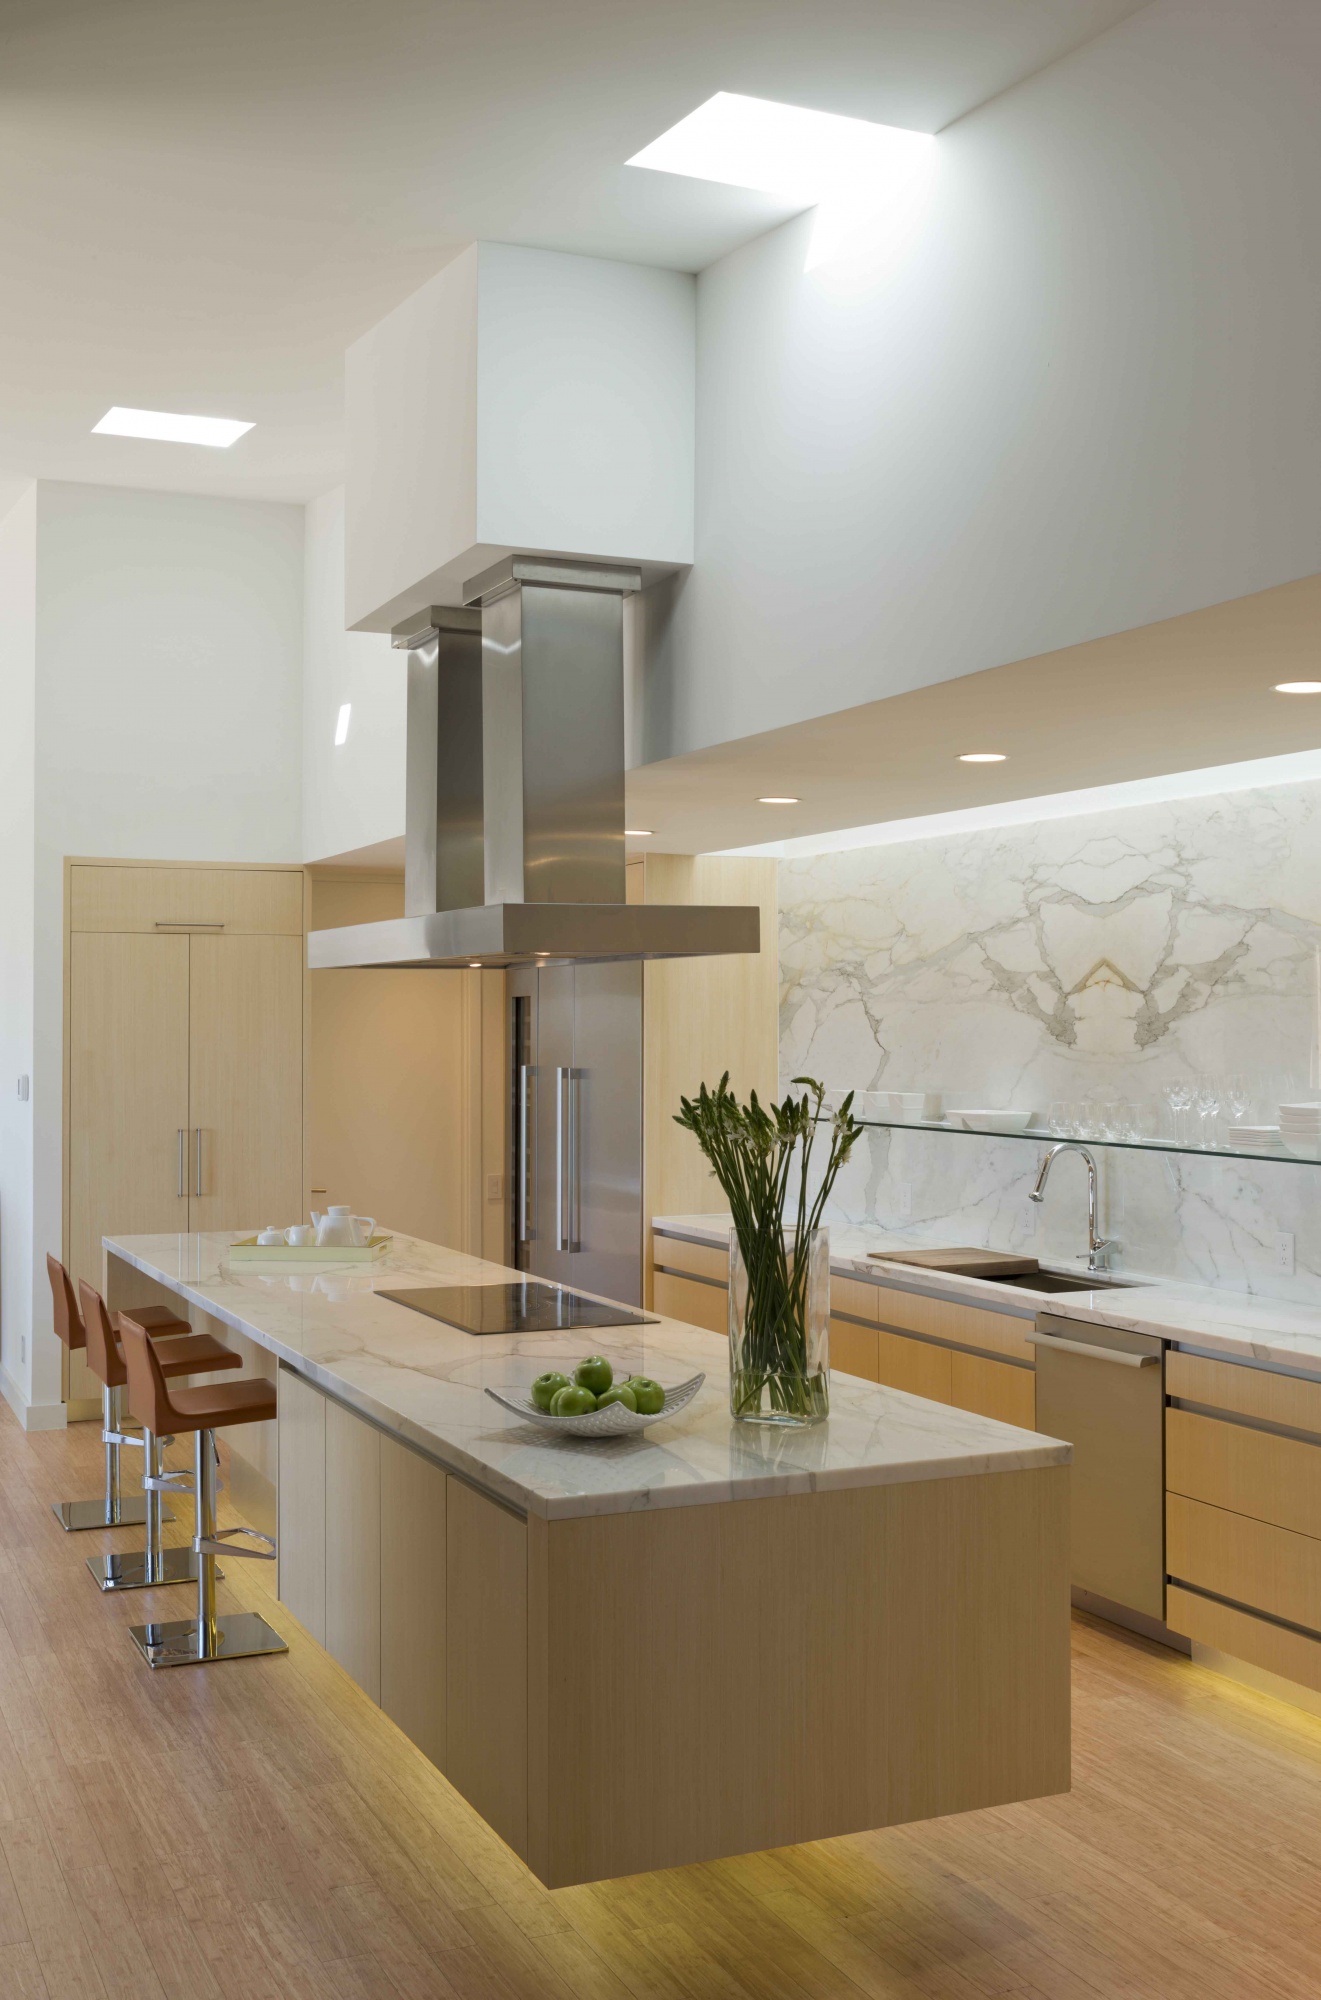 The appearance of levitation is experienced within the kitchen cabinetry.